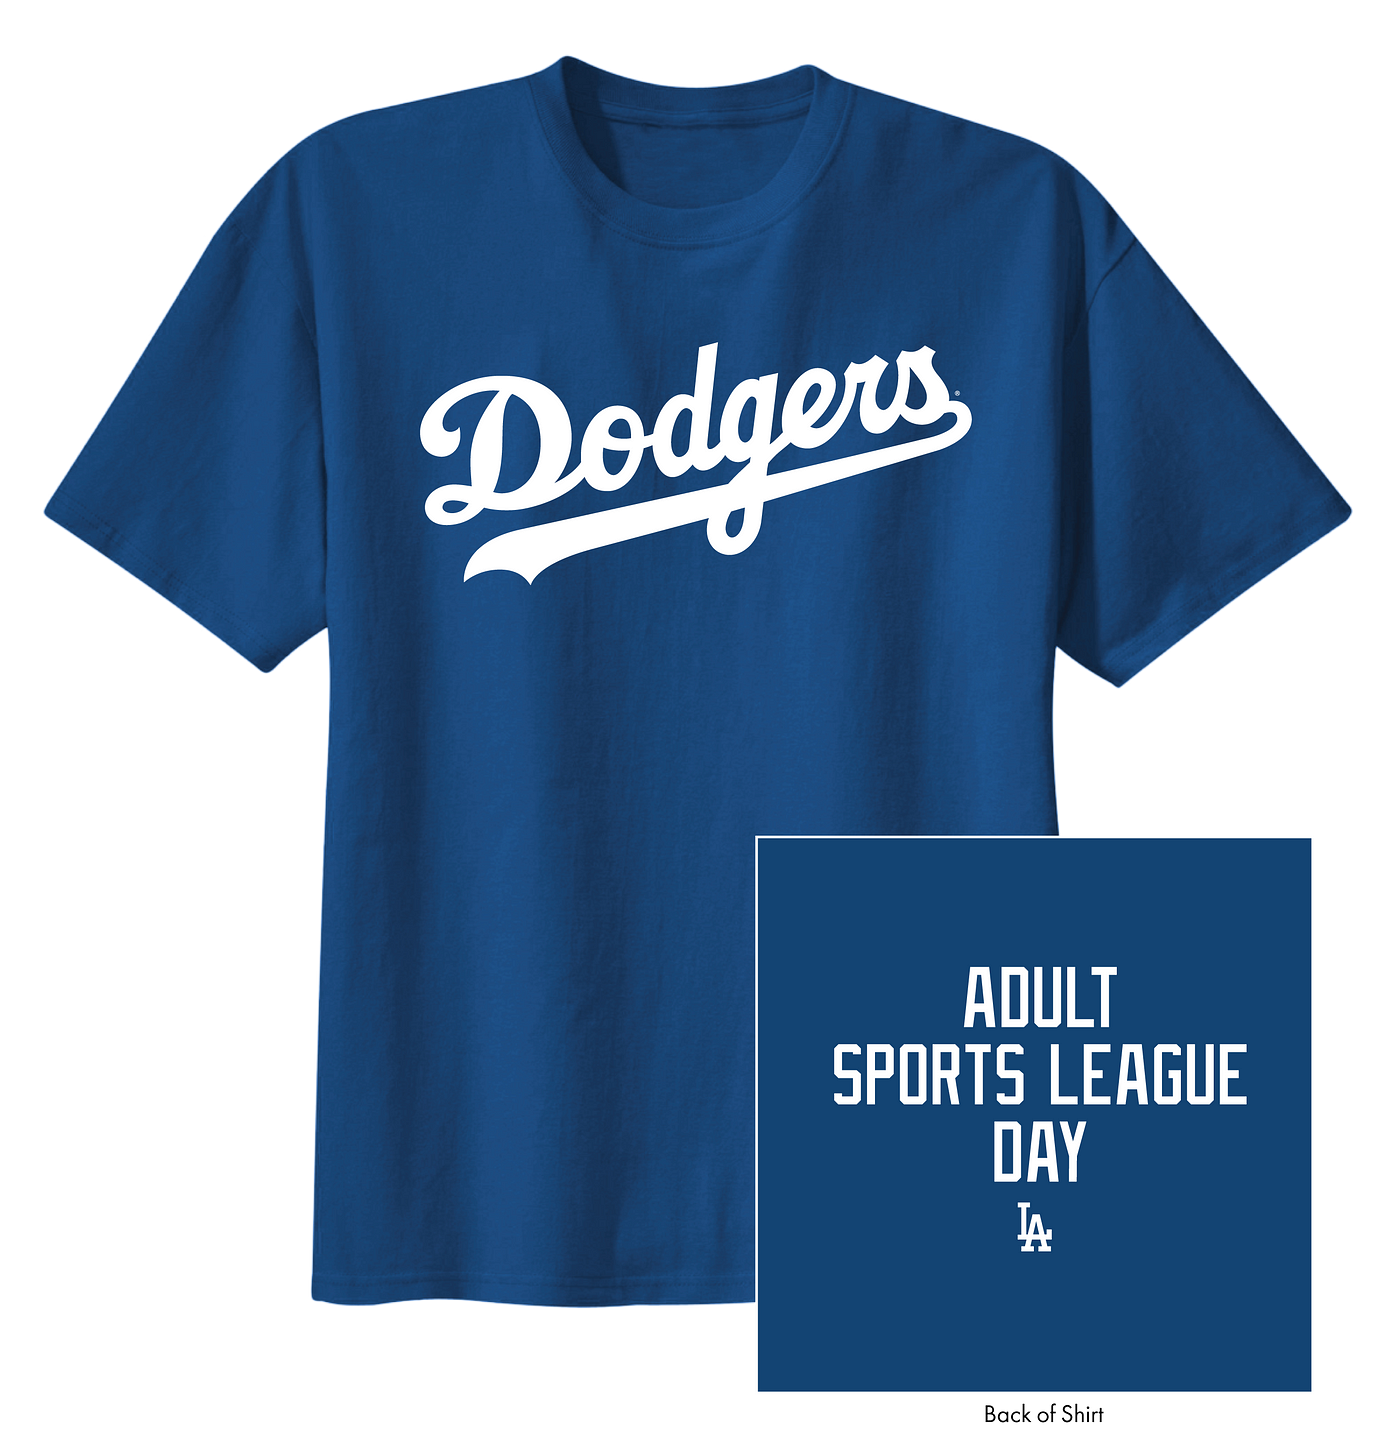 End of season Dodger Stadium special event ticket packs remain, by Rowan  Kavner